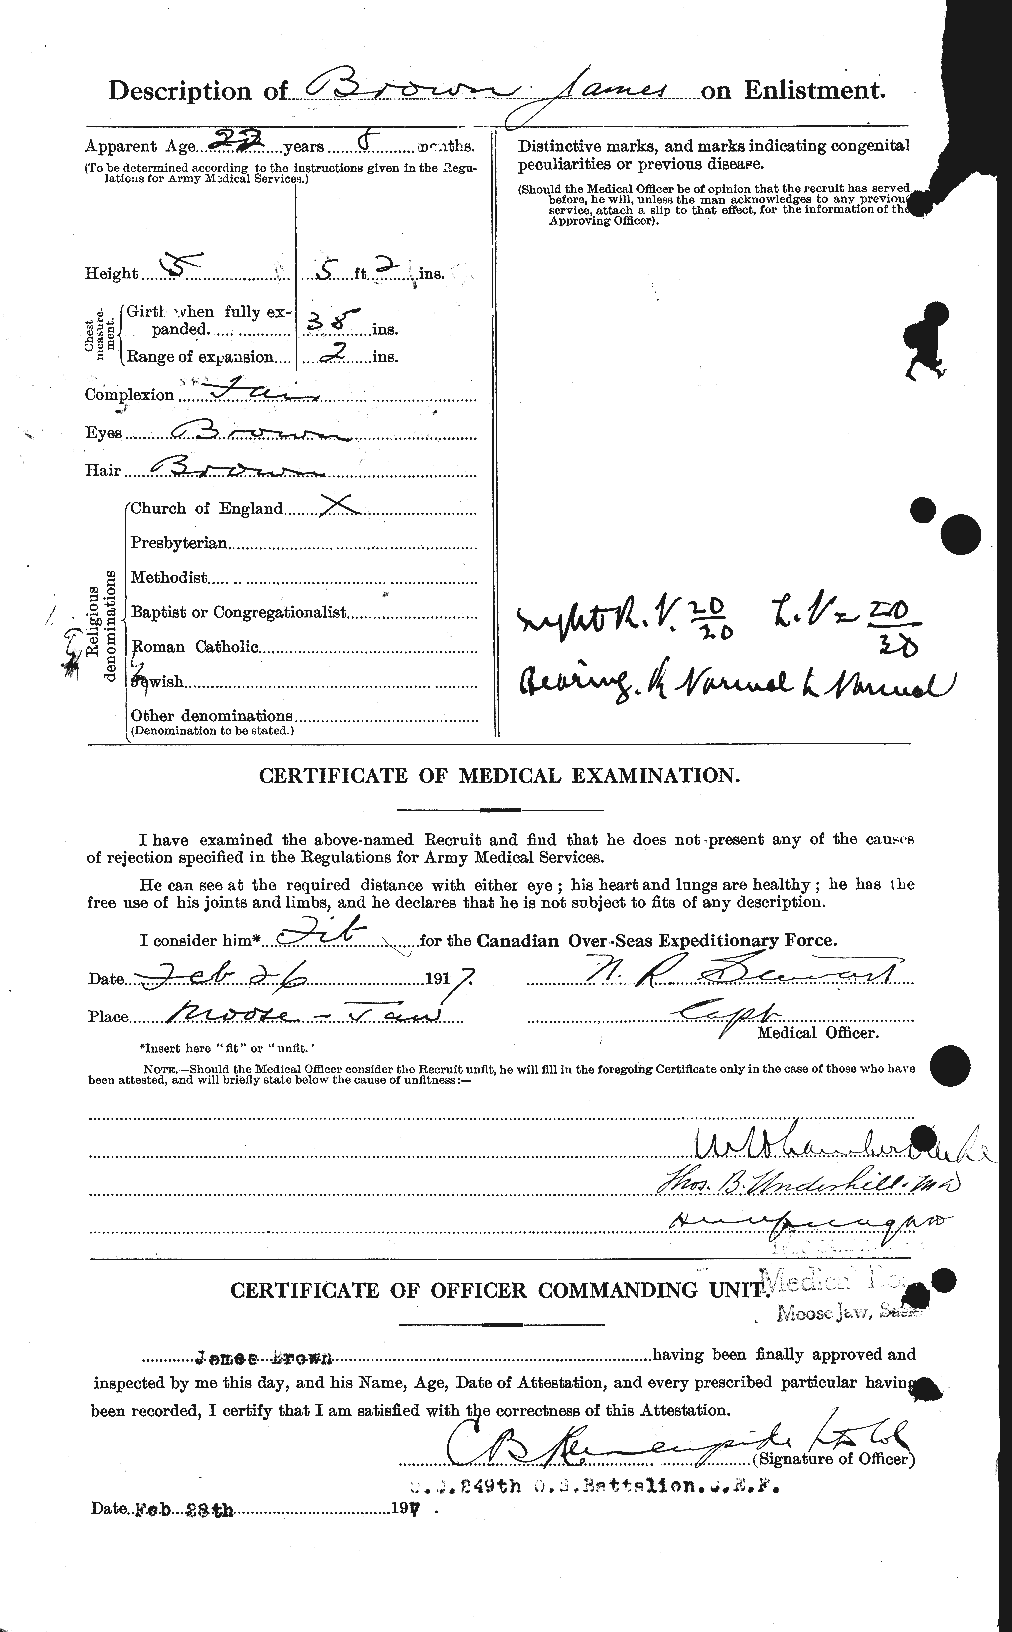 Personnel Records of the First World War - CEF 265780b